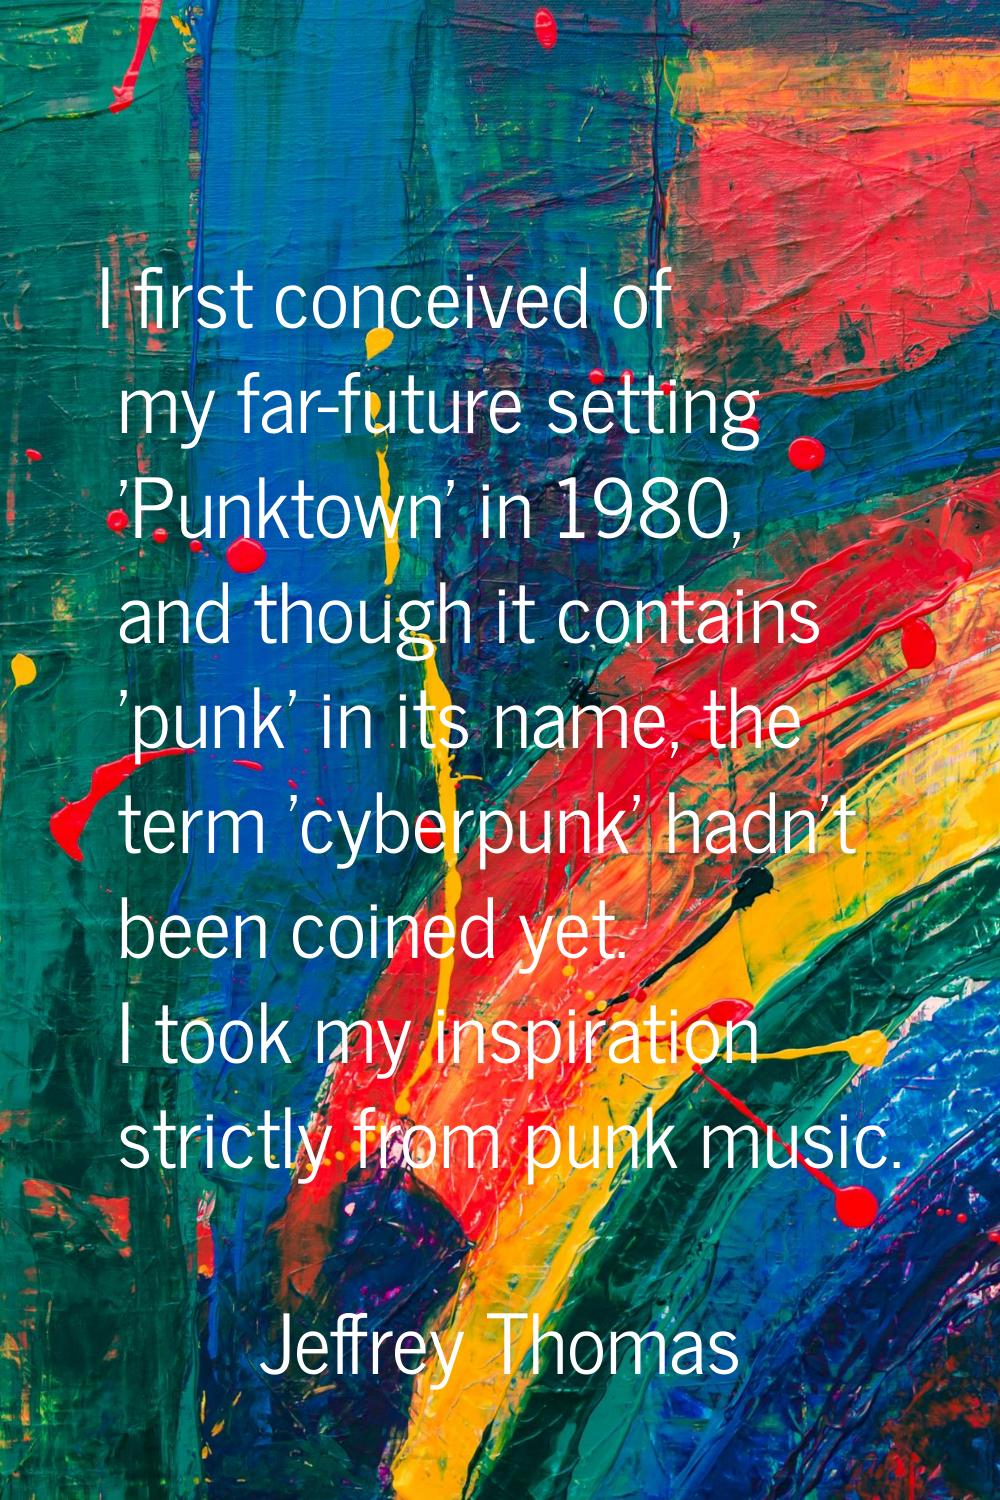 I first conceived of my far-future setting 'Punktown' in 1980, and though it contains 'punk' in its